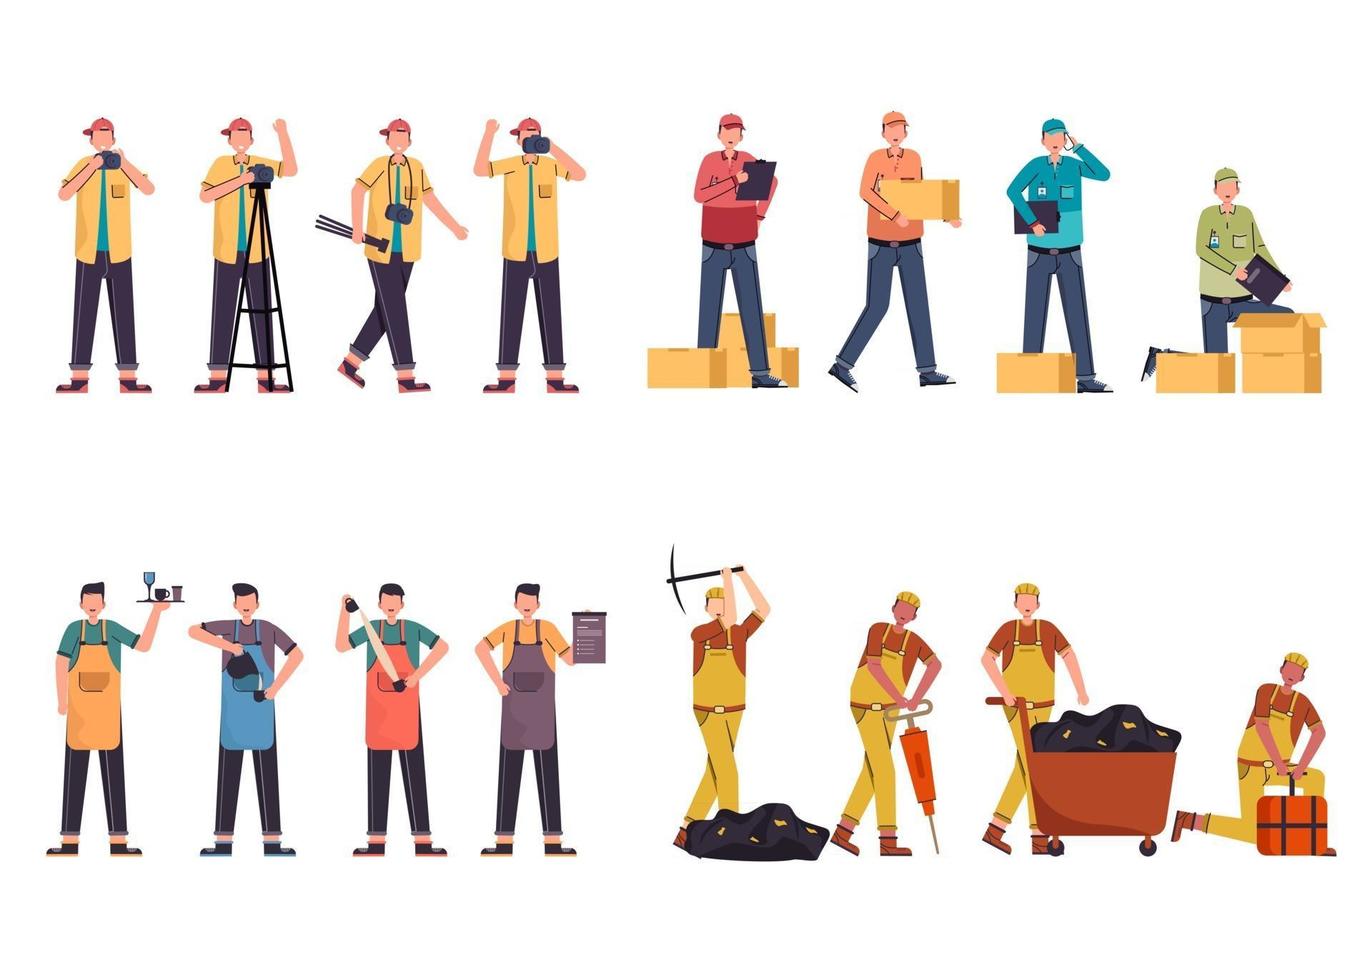 Bundle of many career character 2 sets, 12 poses of various professions, lifestyles, vector